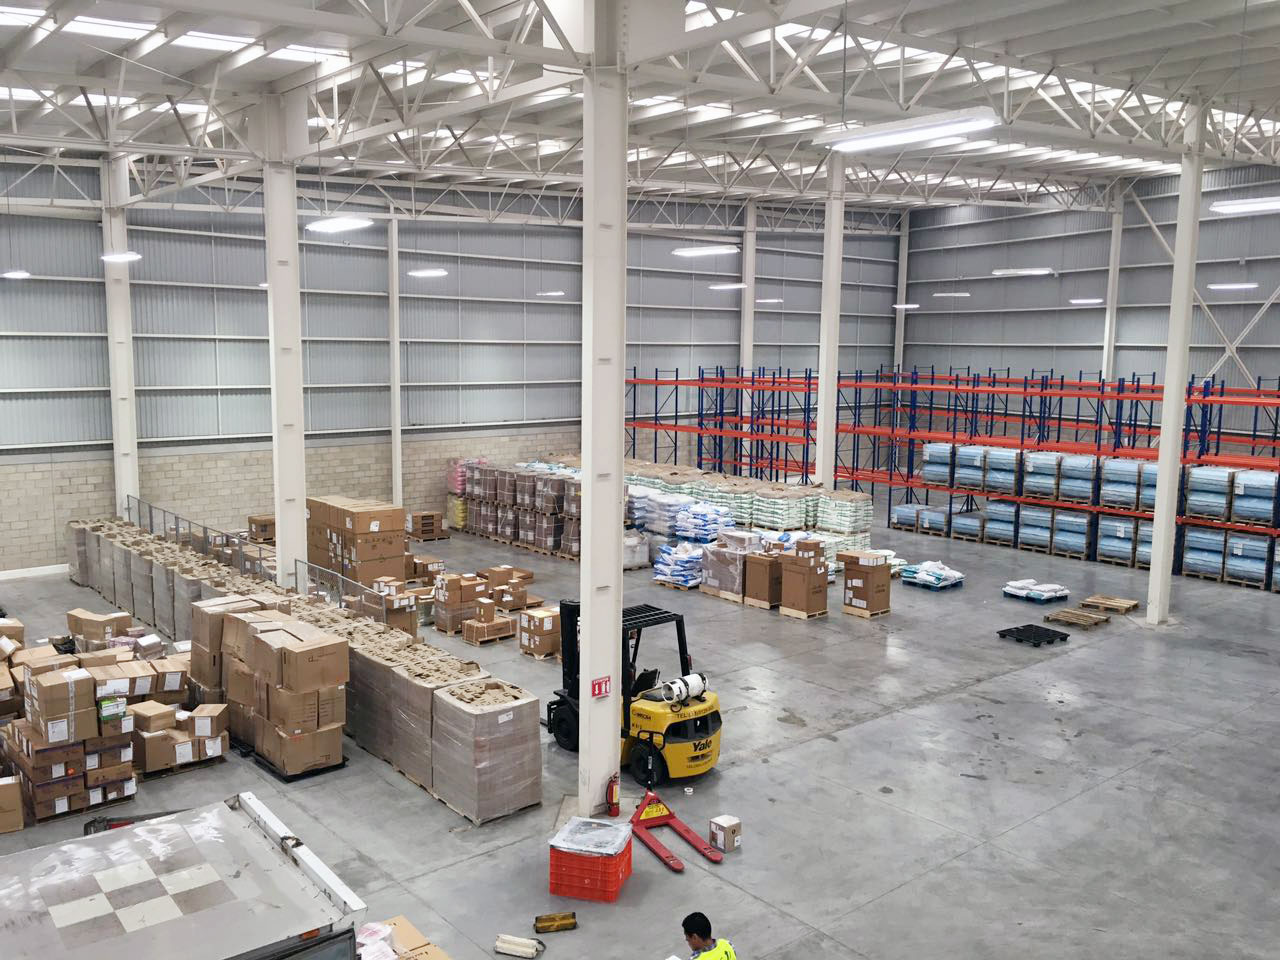 The Guadalajara Branch features a 16,000-square-foot warehouse. Available services include labeling, pick and pack, checkpoint, weighing and measuring, and storage.